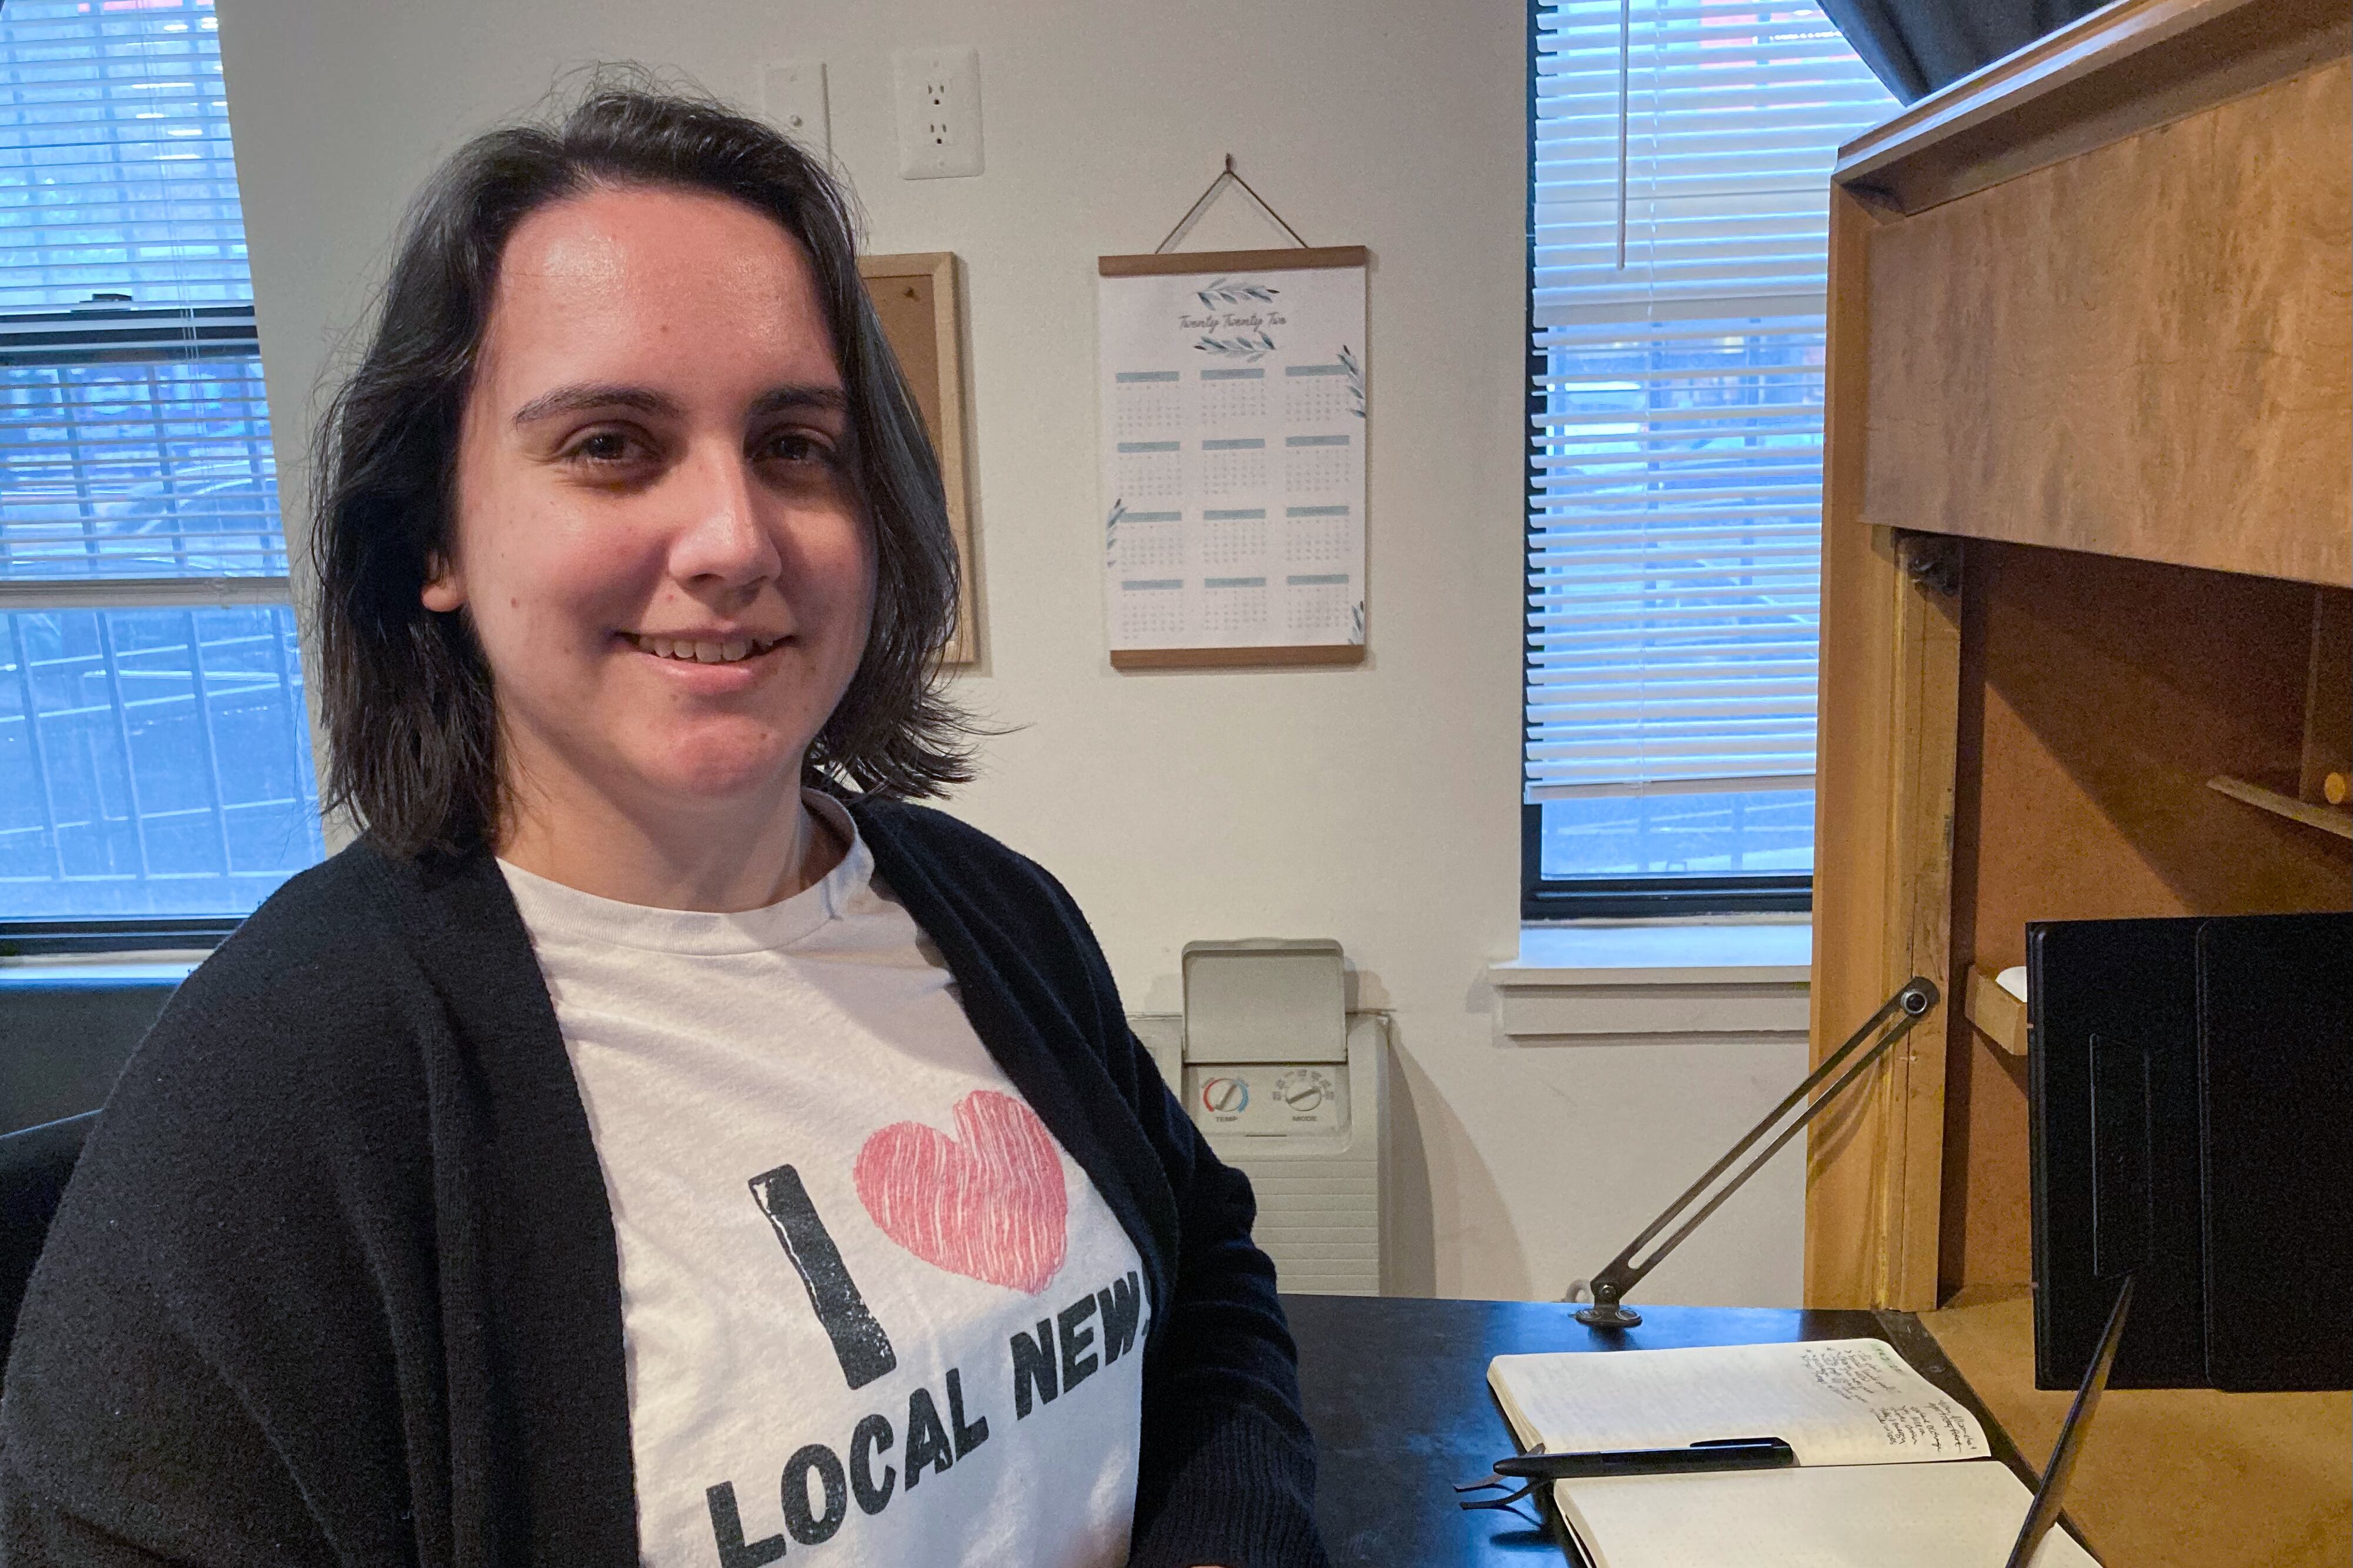 Woman sitting at a desk wearing a T-shirt that reads “I love local news”